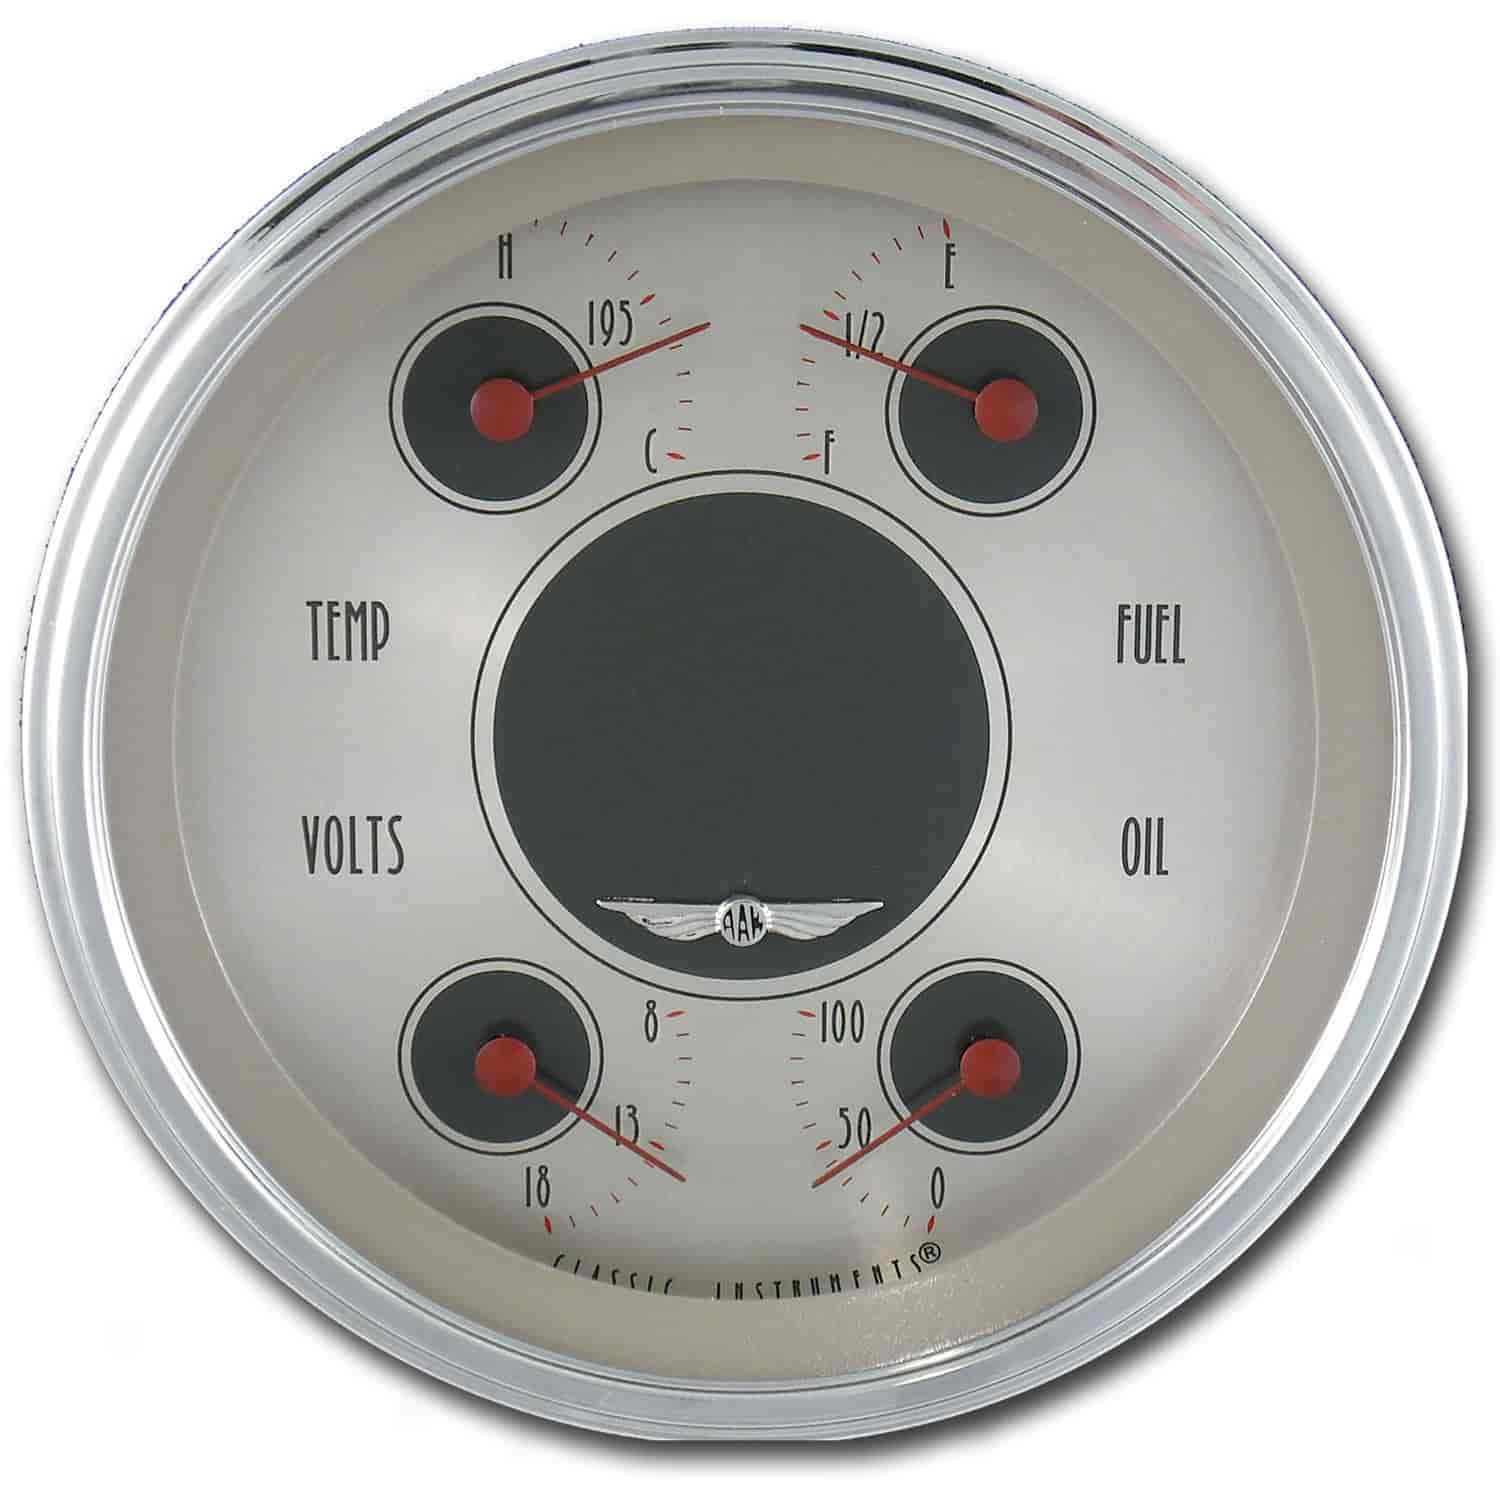 All American Nickel Quad Gauge 4-5/8" Electrical Includes: